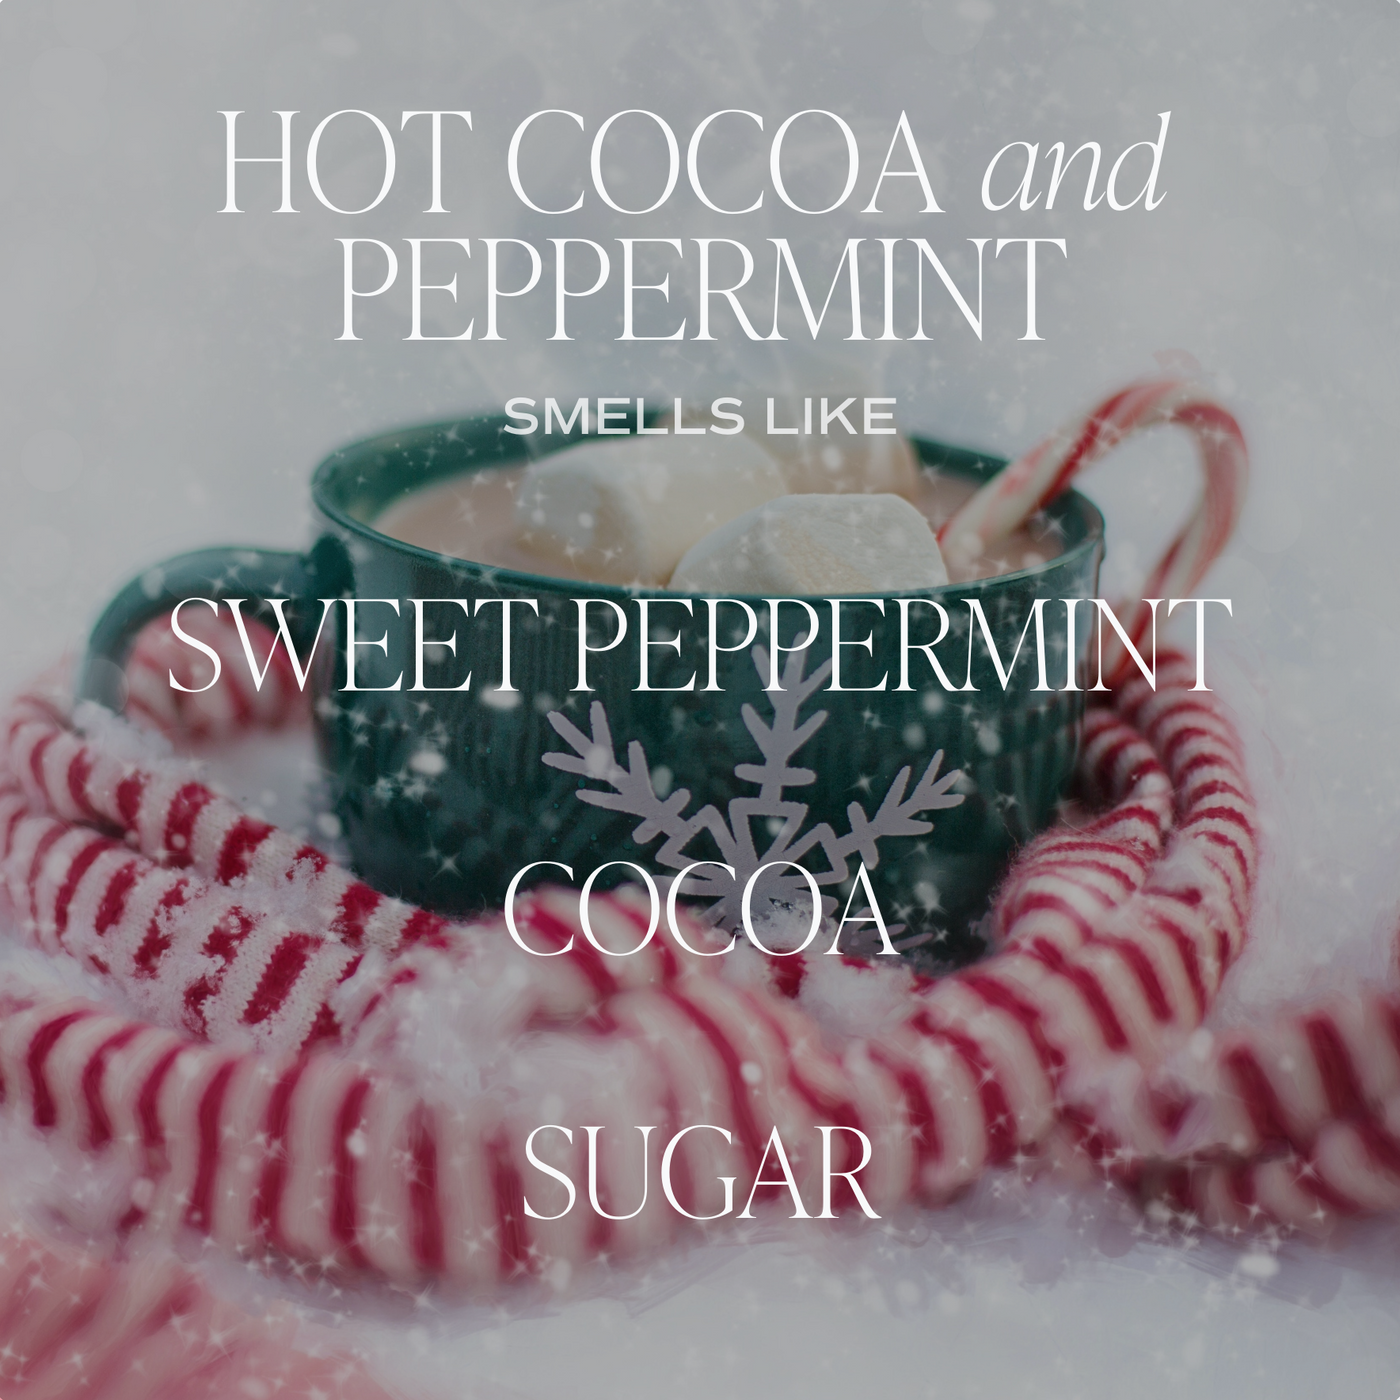 Hot Cocoa and Peppermint Soy Candle - White Jar - 11 oz